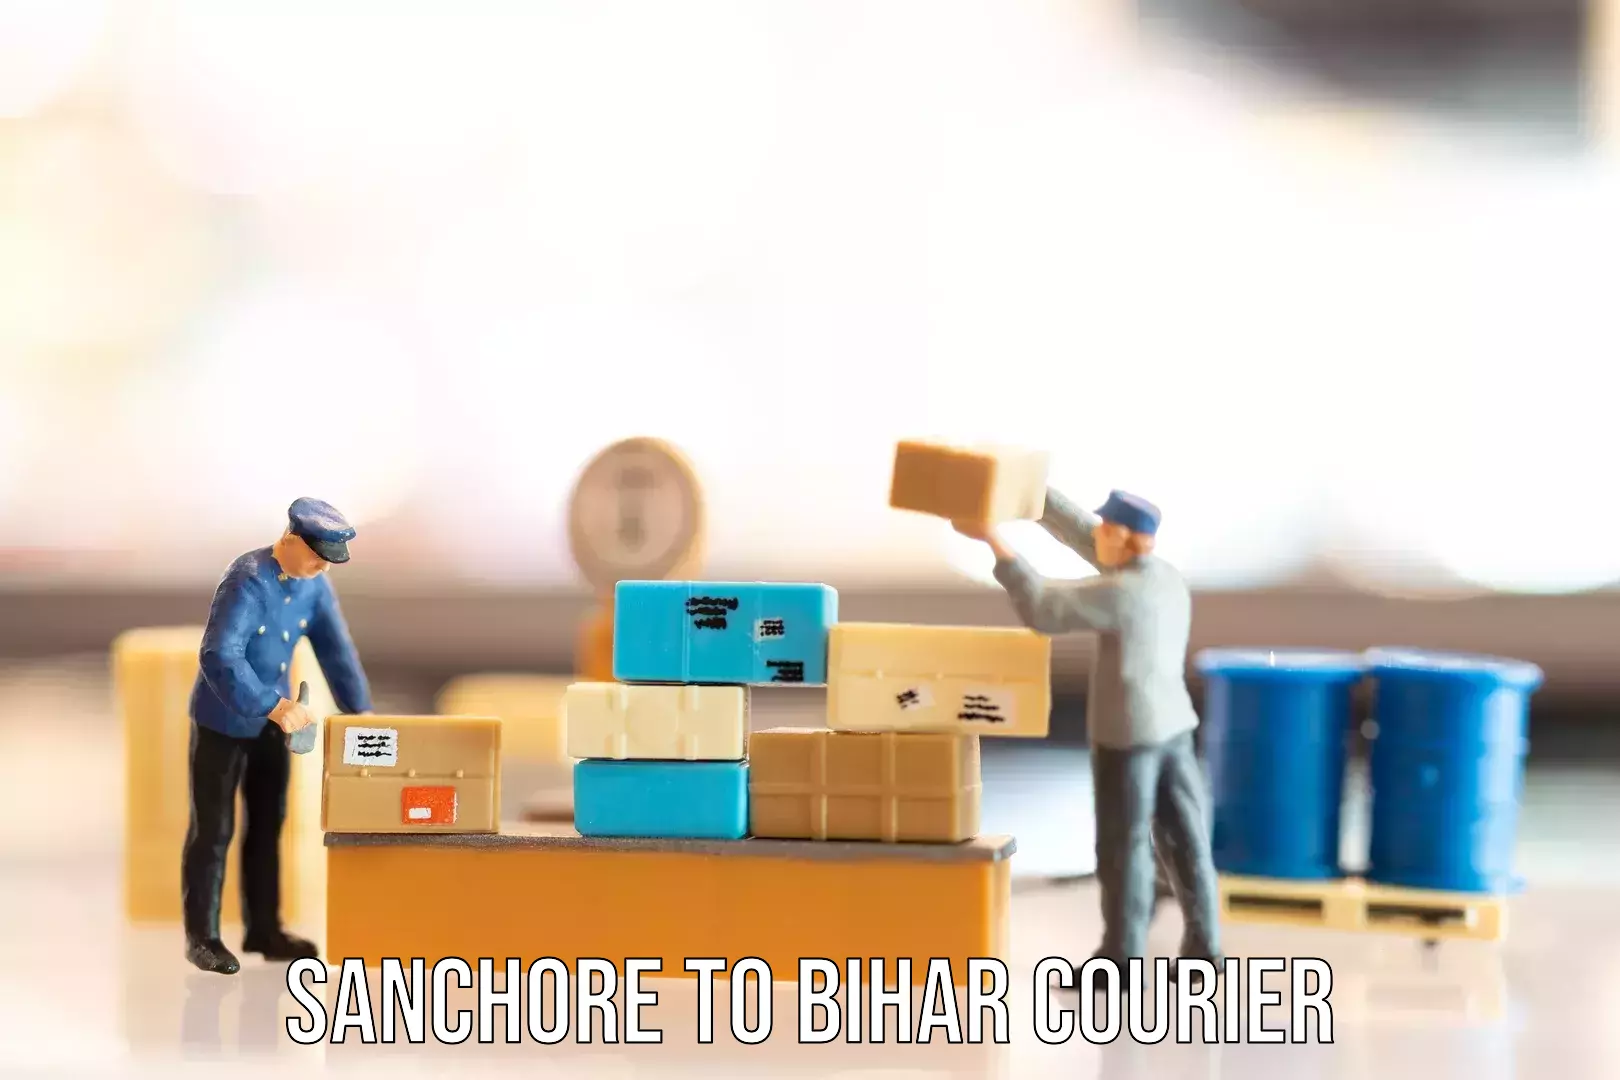 Luggage shipping planner Sanchore to Bihar